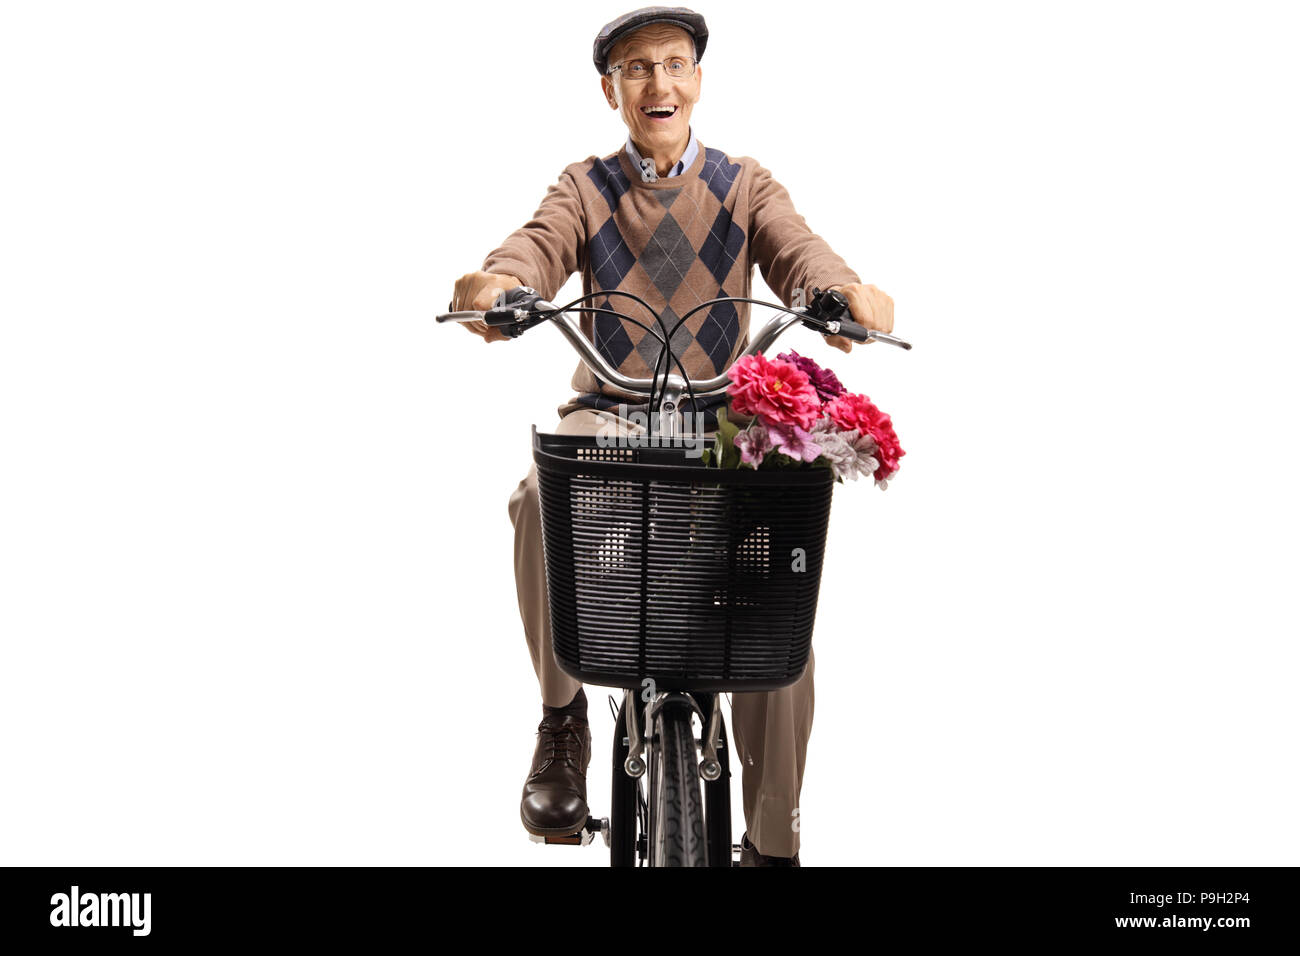 Elderly man riding a bicycle isolated on white background Stock Photo